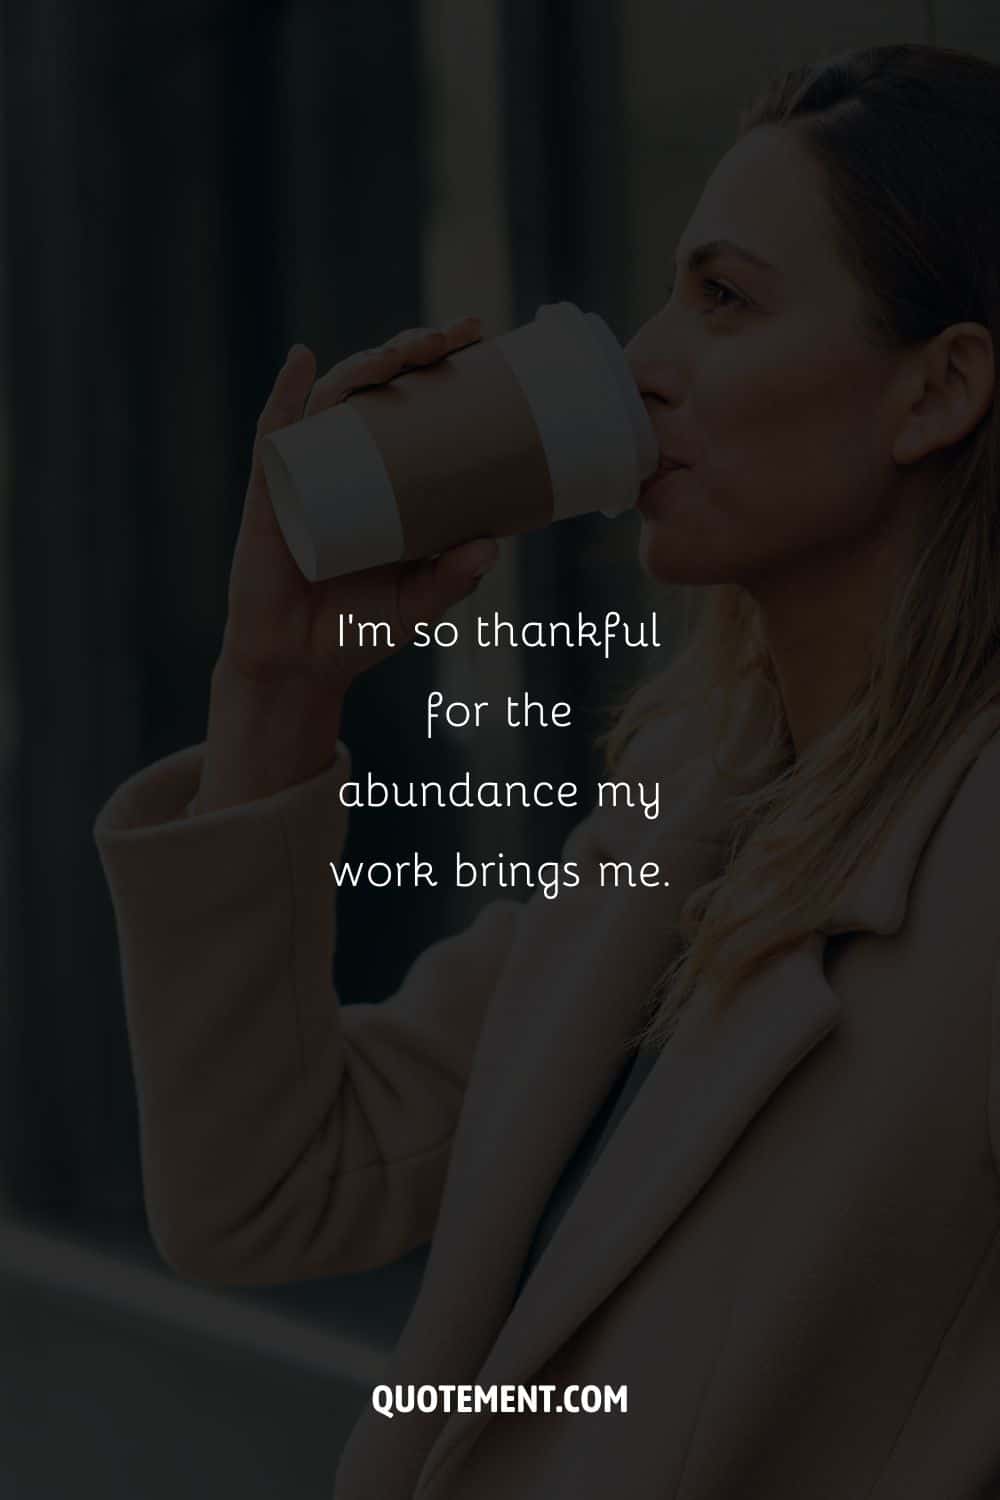 Image of a woman sipping her coffee representing a work affirmation for Tuesday.
